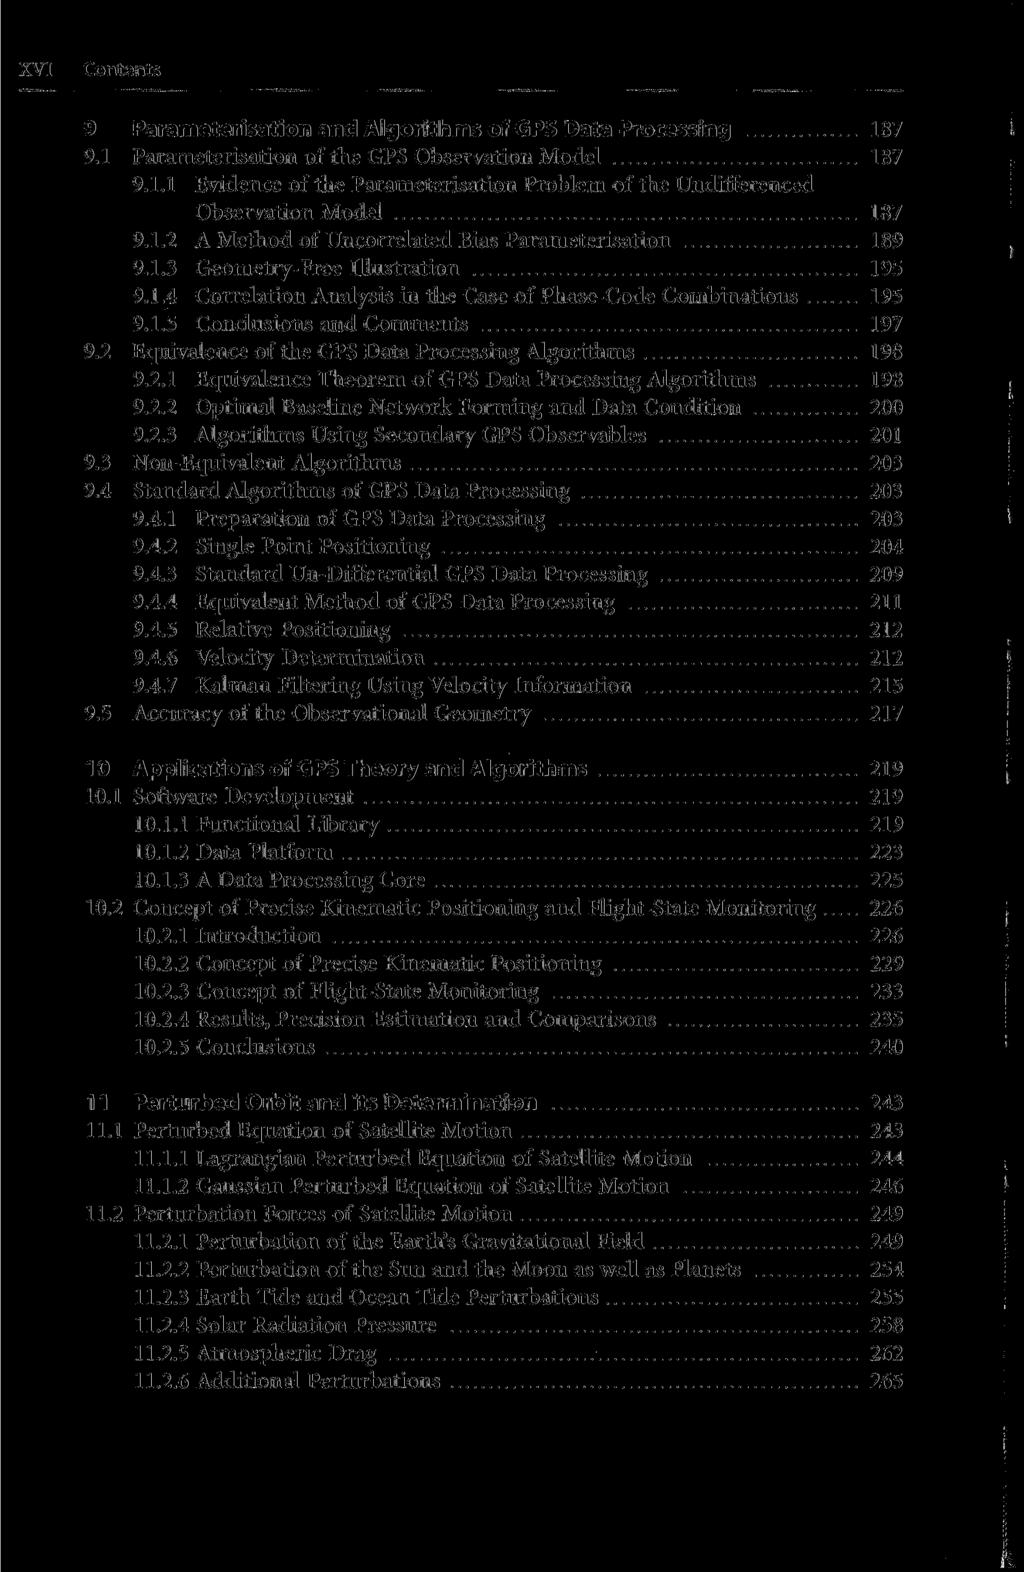 XVI Contents 9 Parameterisation and Algorithms of GPS Data Processing 187 9.1 Parameterisation of the GPS Observation Model 187 9.1.1 Evidence of the Parameterisation Problem of the Undifferenced Observation Model 187 9.